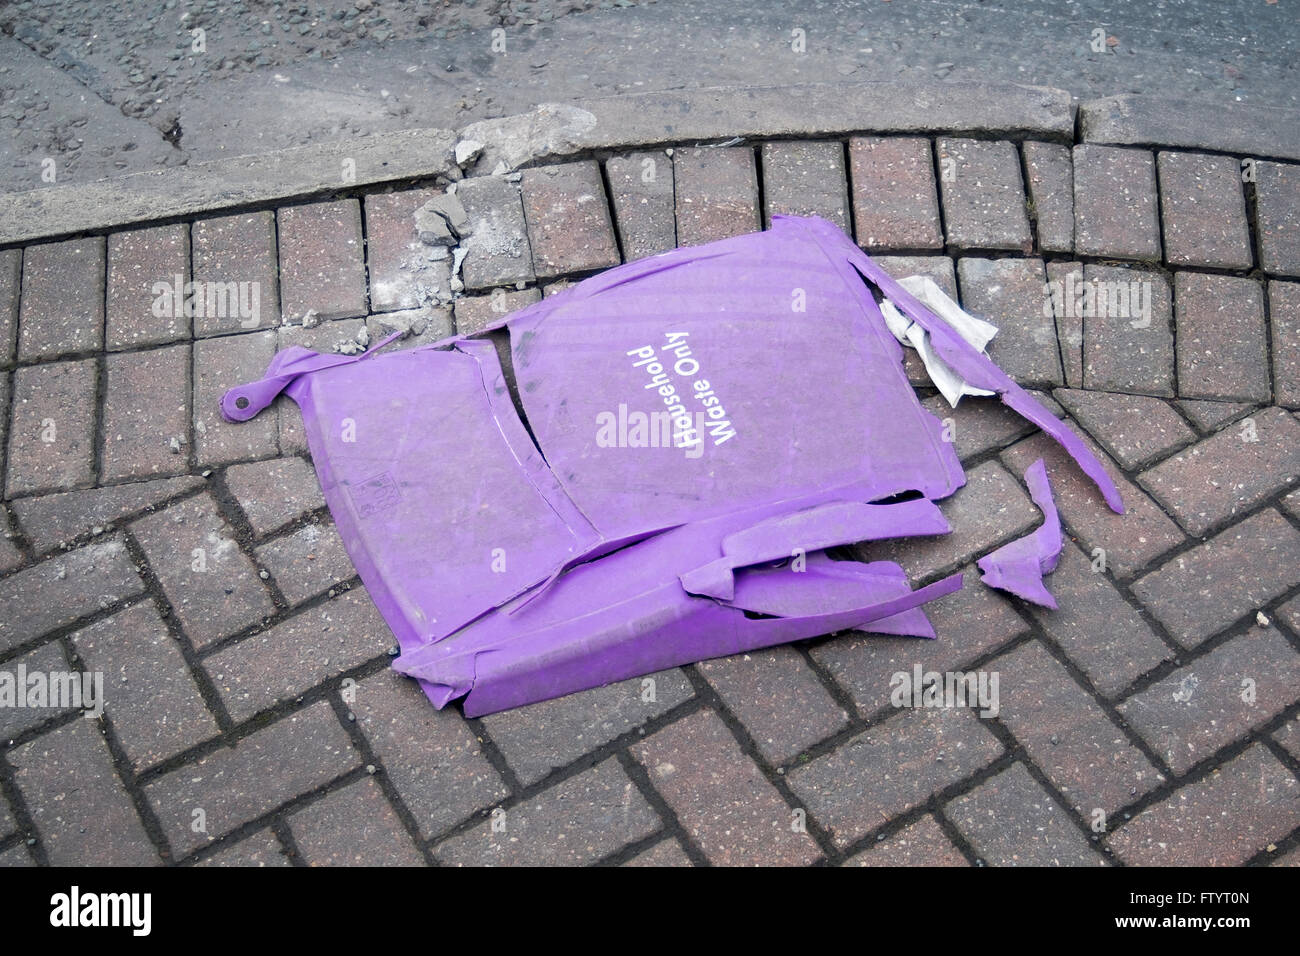 Household waste bin lies crushed on the pavement Stock Photo